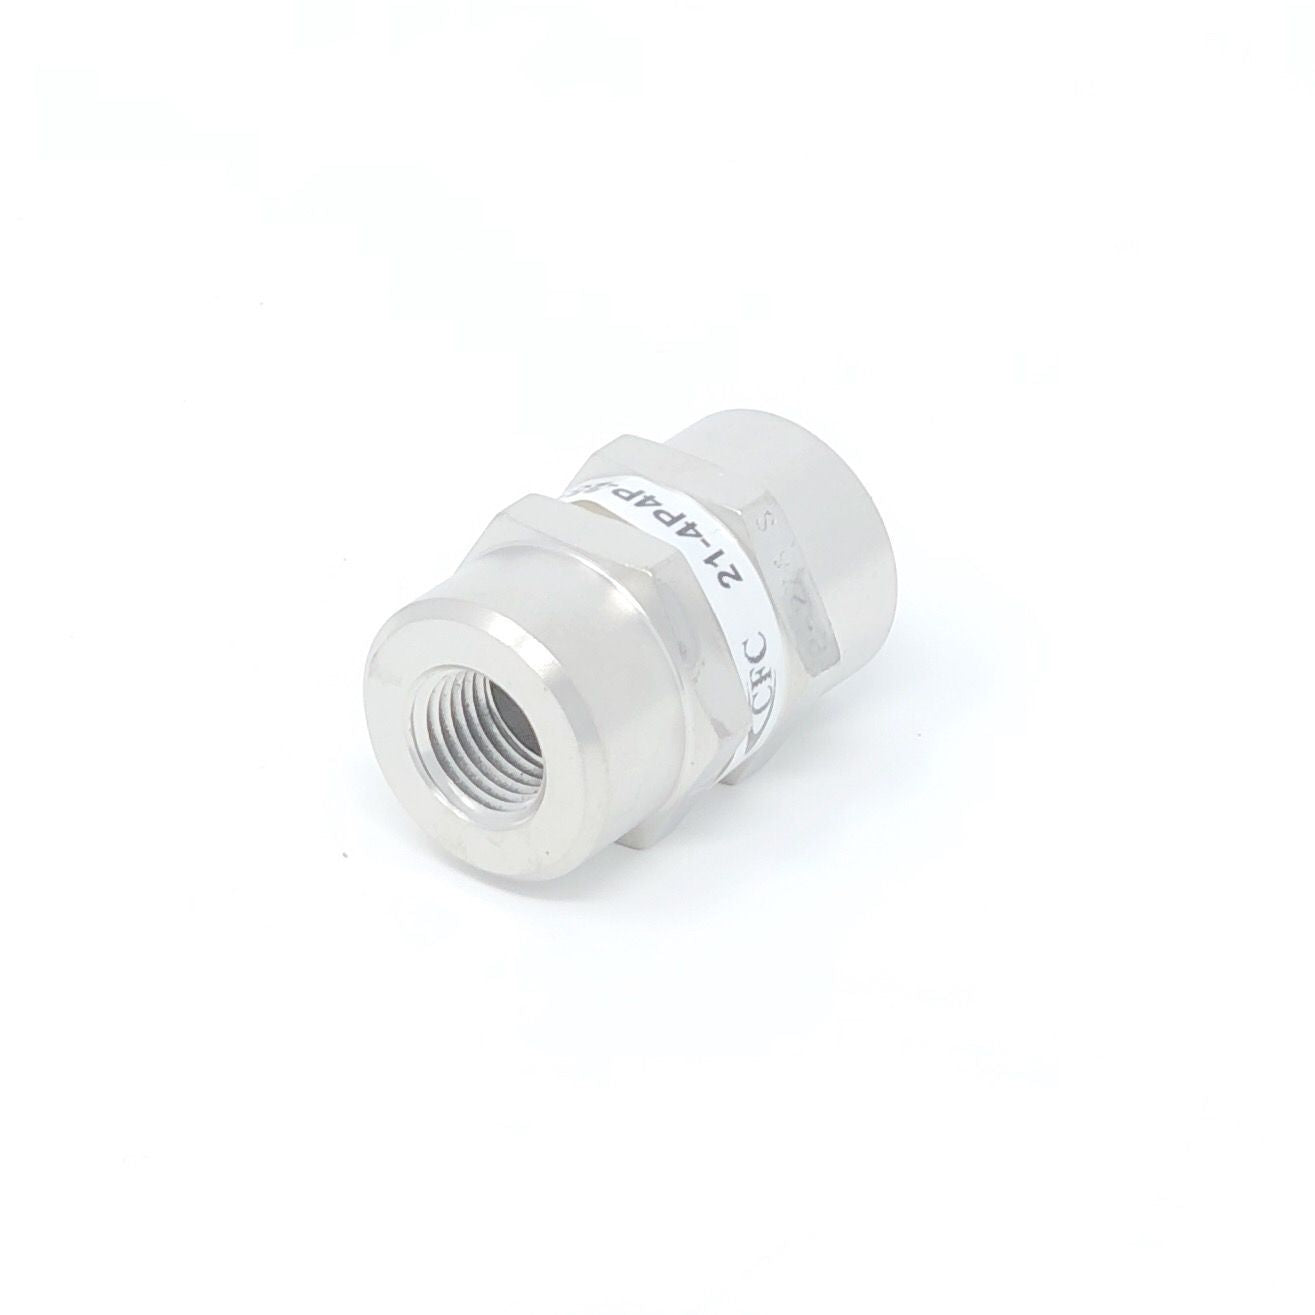 21-8N8N-40S : Chase High Pressure Inline Filter, 3000psi, 1/2" NPT, 40 Micron, No Visual Indicator, No Bypass